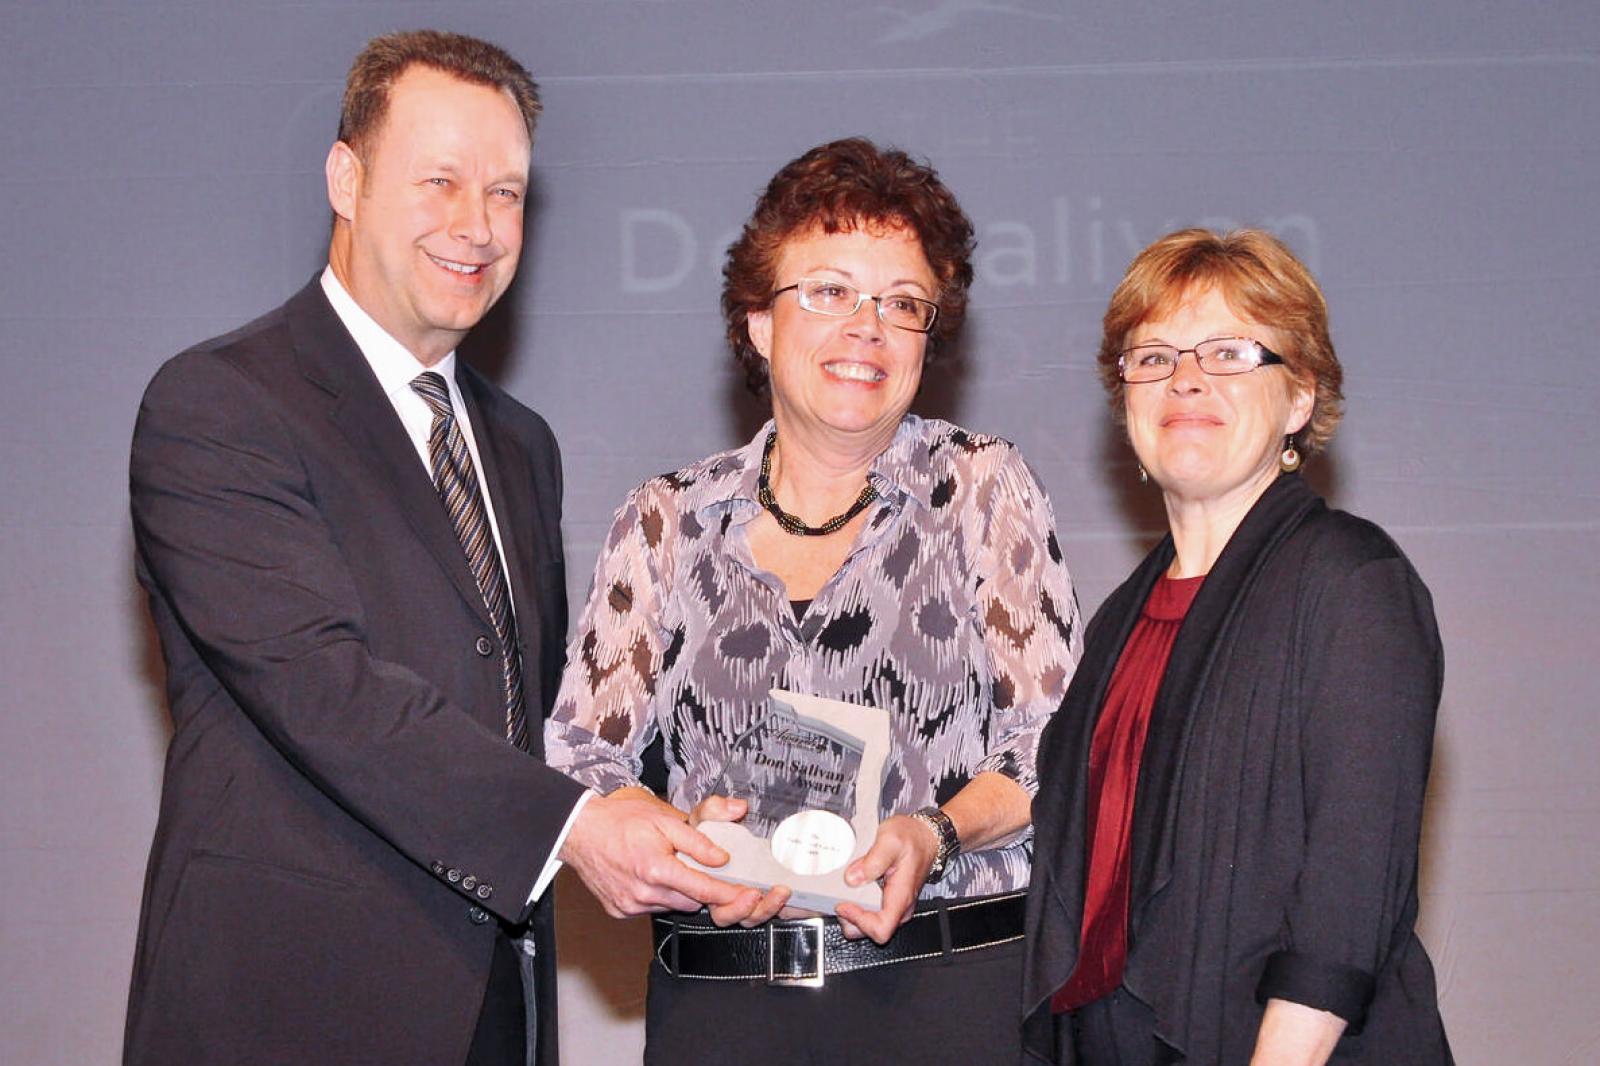 Barbara Rosensweig (centre) and Barb Welburn of The Cultivated Garden of Toronto received the inaugural Don Salivan Award for Grounds Management, presented by Gregg Salivan in memory of his father.